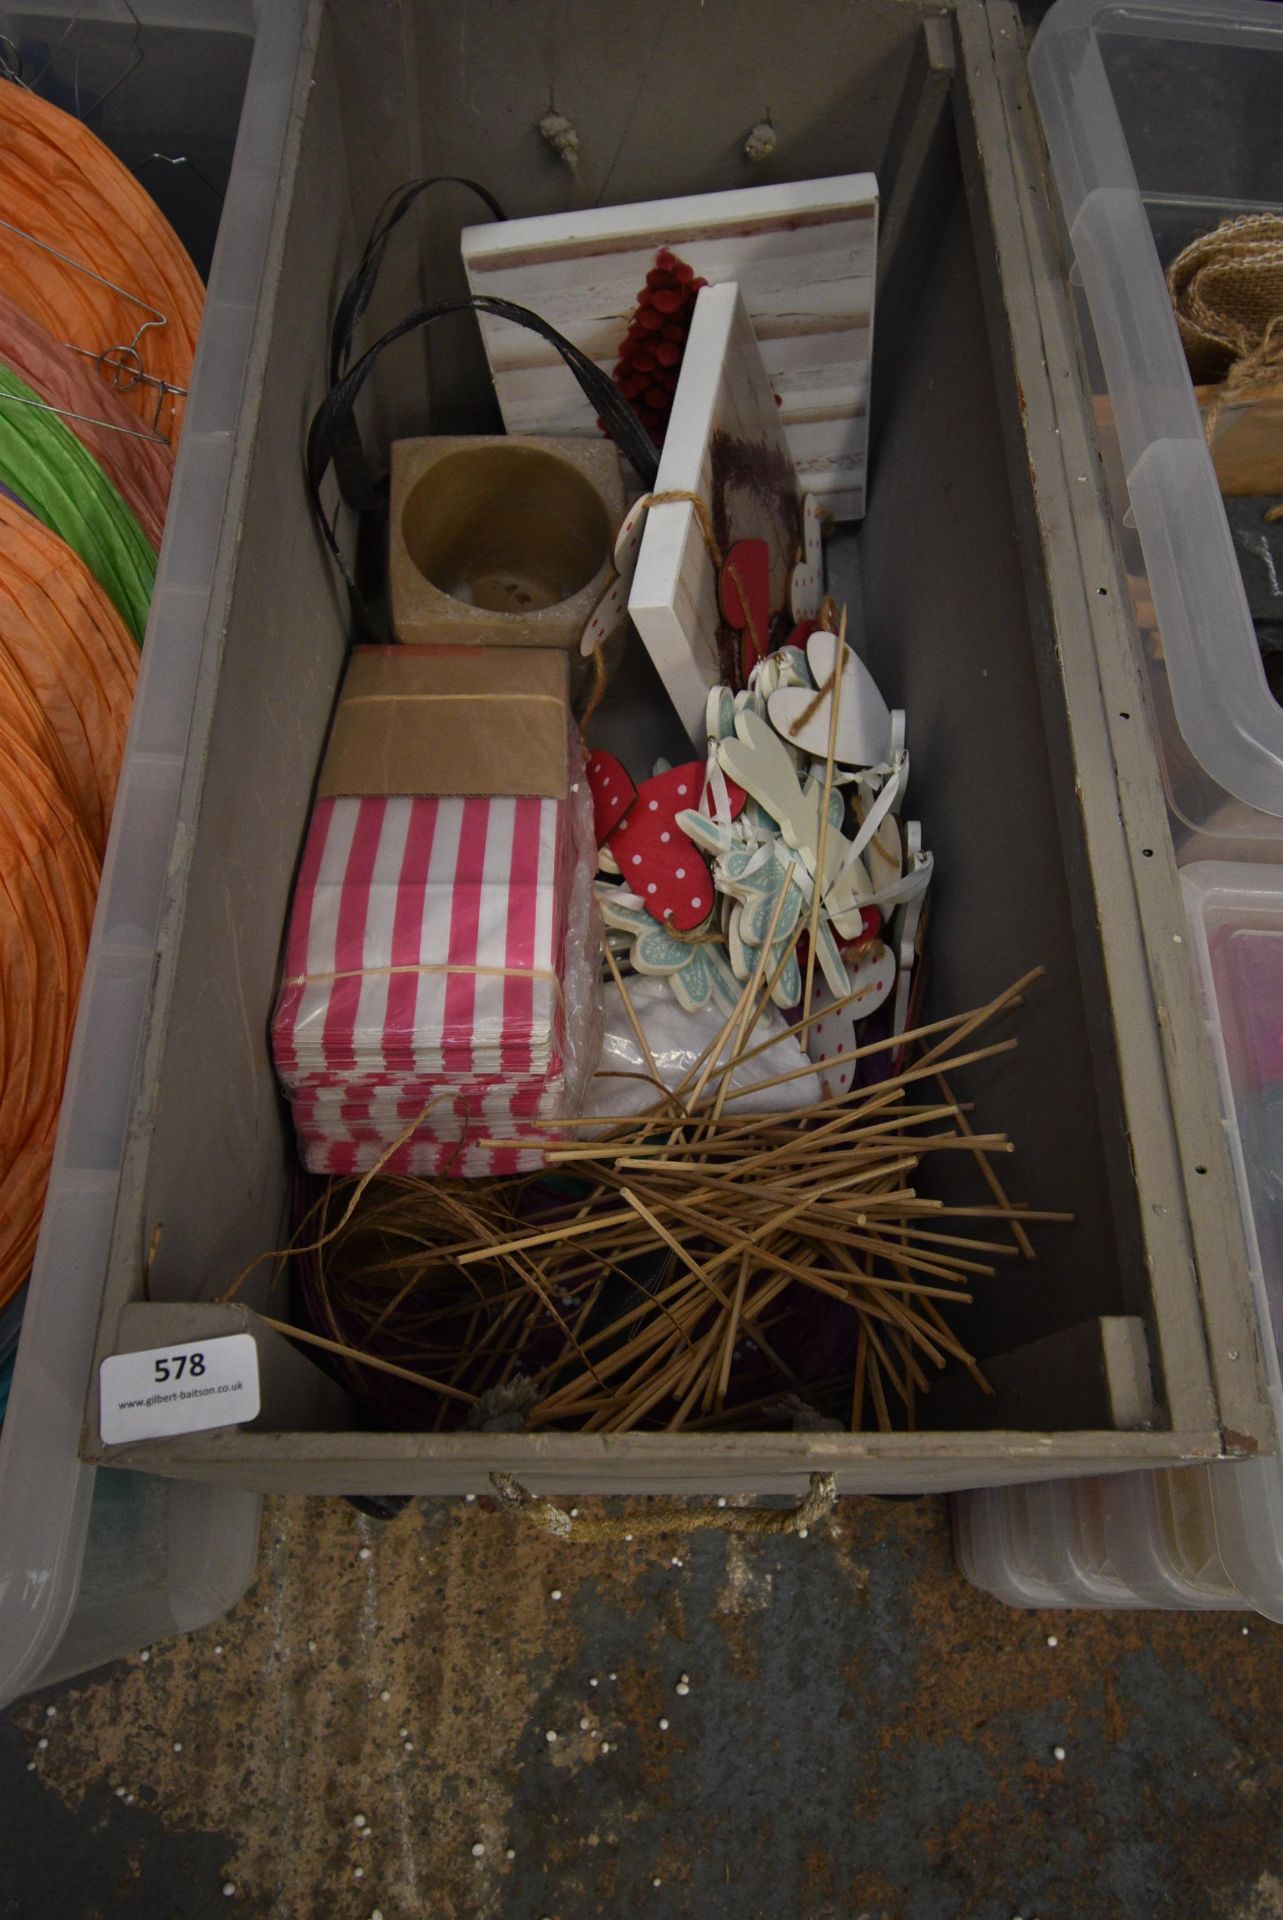 *Wood Crate Containing Assorted Candy Stripe Bags, Decorative Items, Pictures, etc.